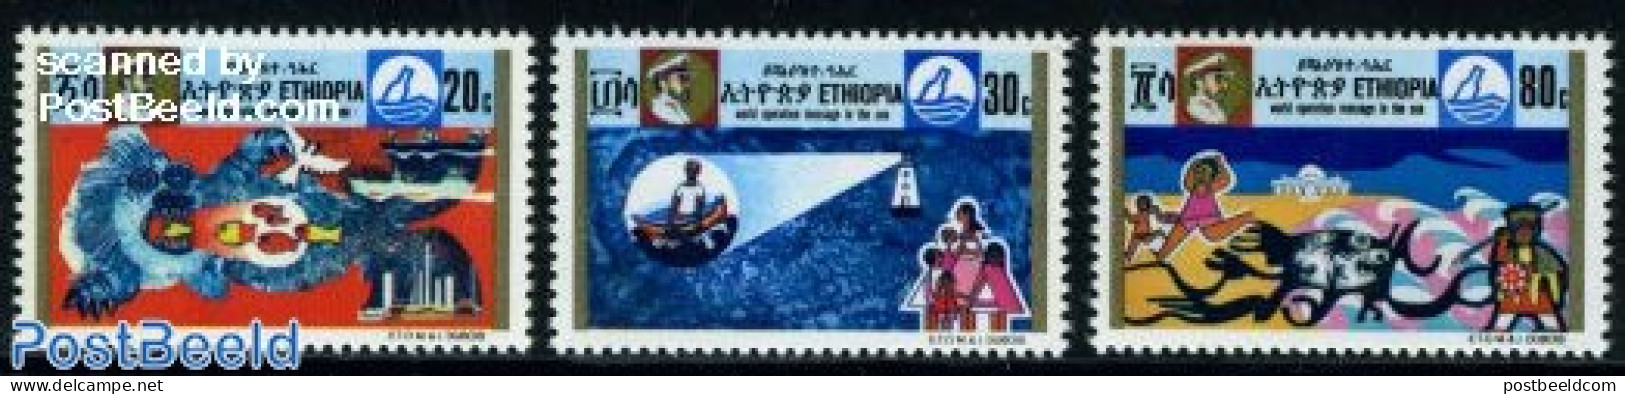 Ethiopia 1973 Clean Seas 3v, Mint NH, Nature - Various - Environment - Lighthouses & Safety At Sea - Protection De L'environnement & Climat